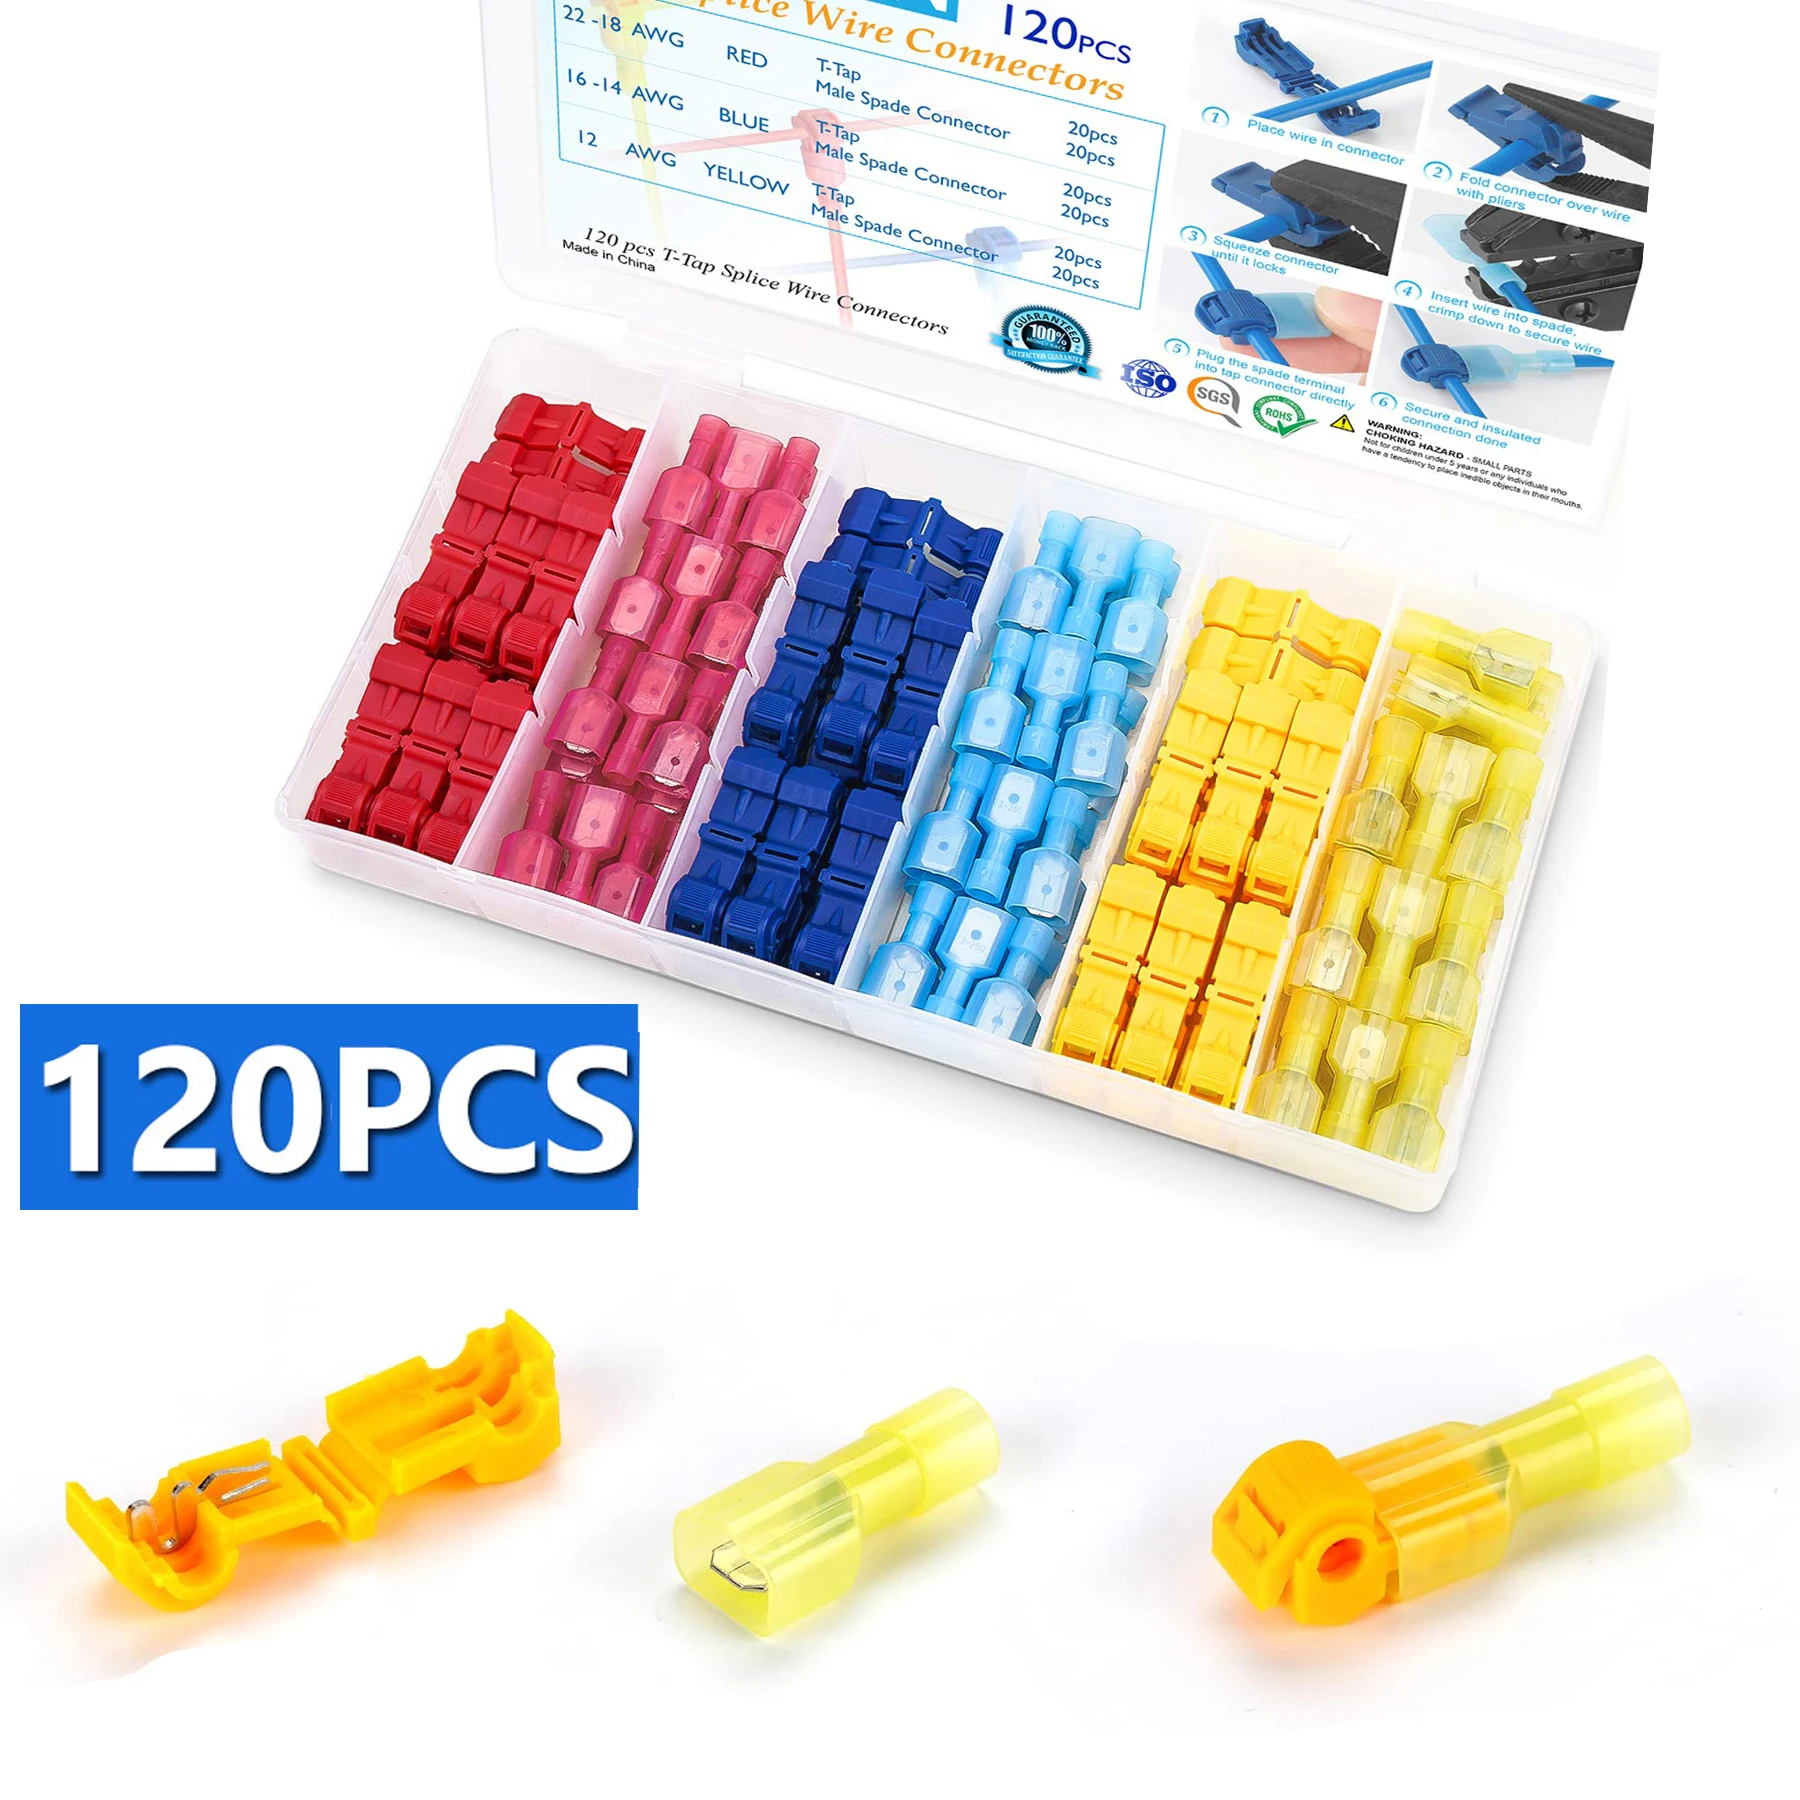 120 pcs crimp terminal blocks electrical connector connection clamps t shaped quick free stripping plugs cable connector plug 120 PCS Crimp Terminal Blocks Electrical Connector Connection Clamps T-Shaped Quick-Free Stripping Plugs Cable Connector Plug